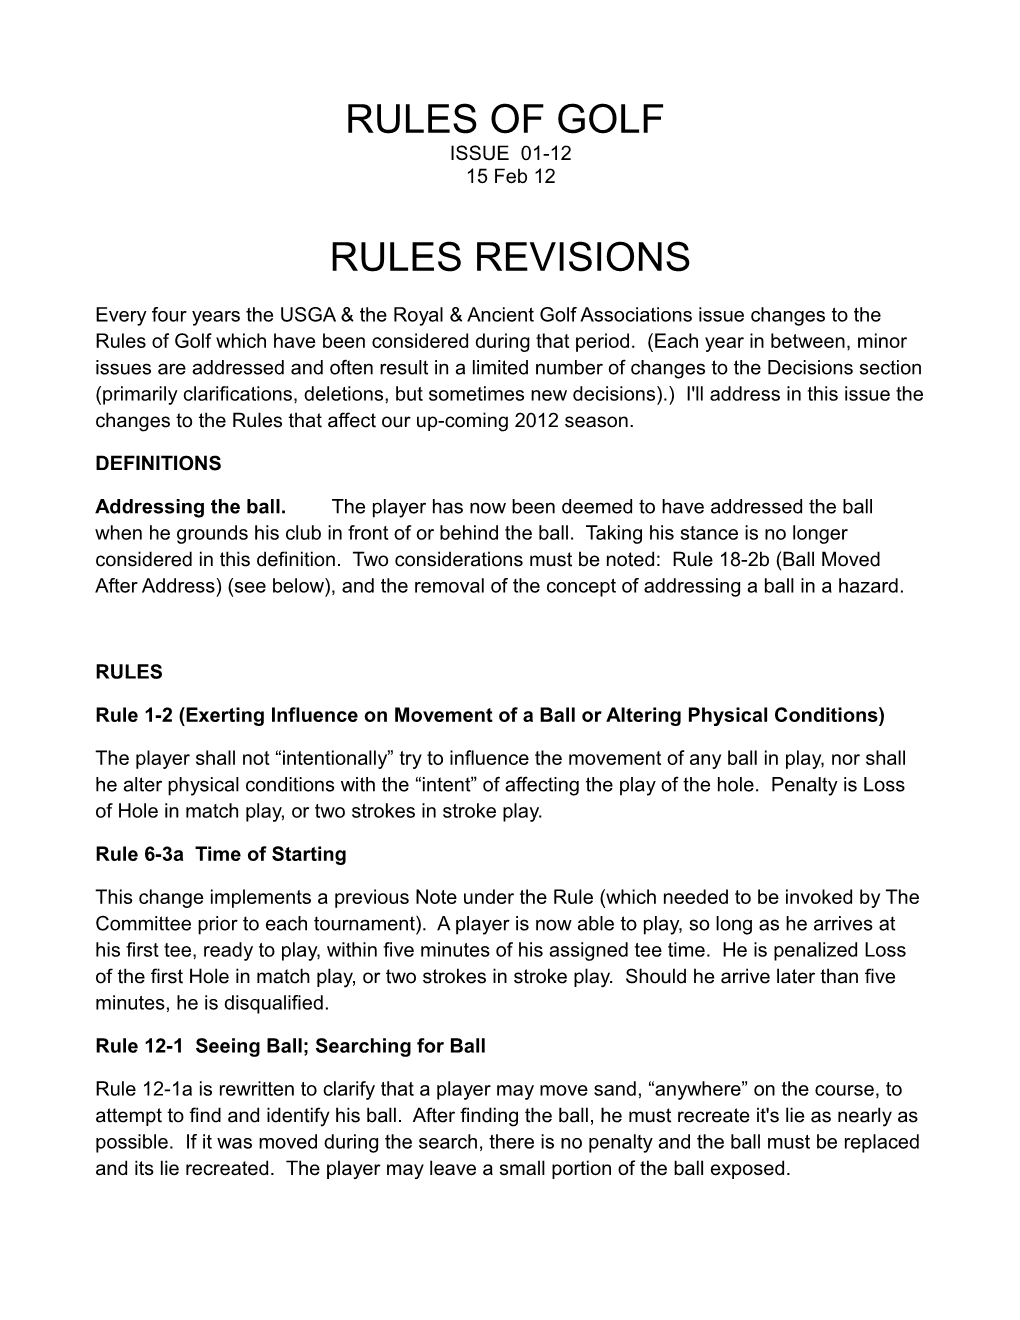 Rule 1-2 (Exerting Influence on Movement of a Ball Or Altering Physical Conditions)